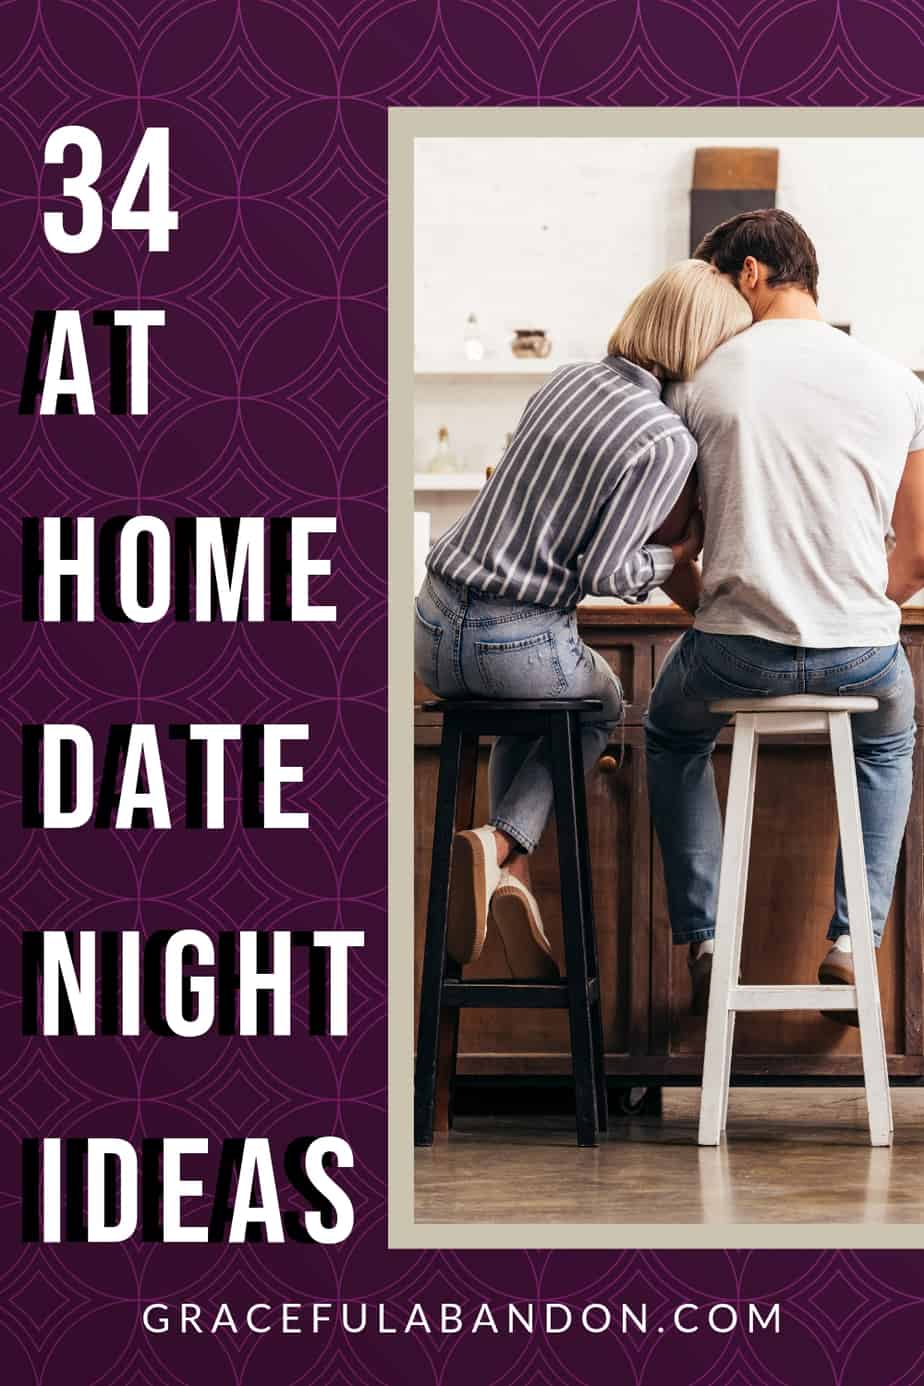 34 At Home Date Night Ideas for Married Couples (and a free prin photo